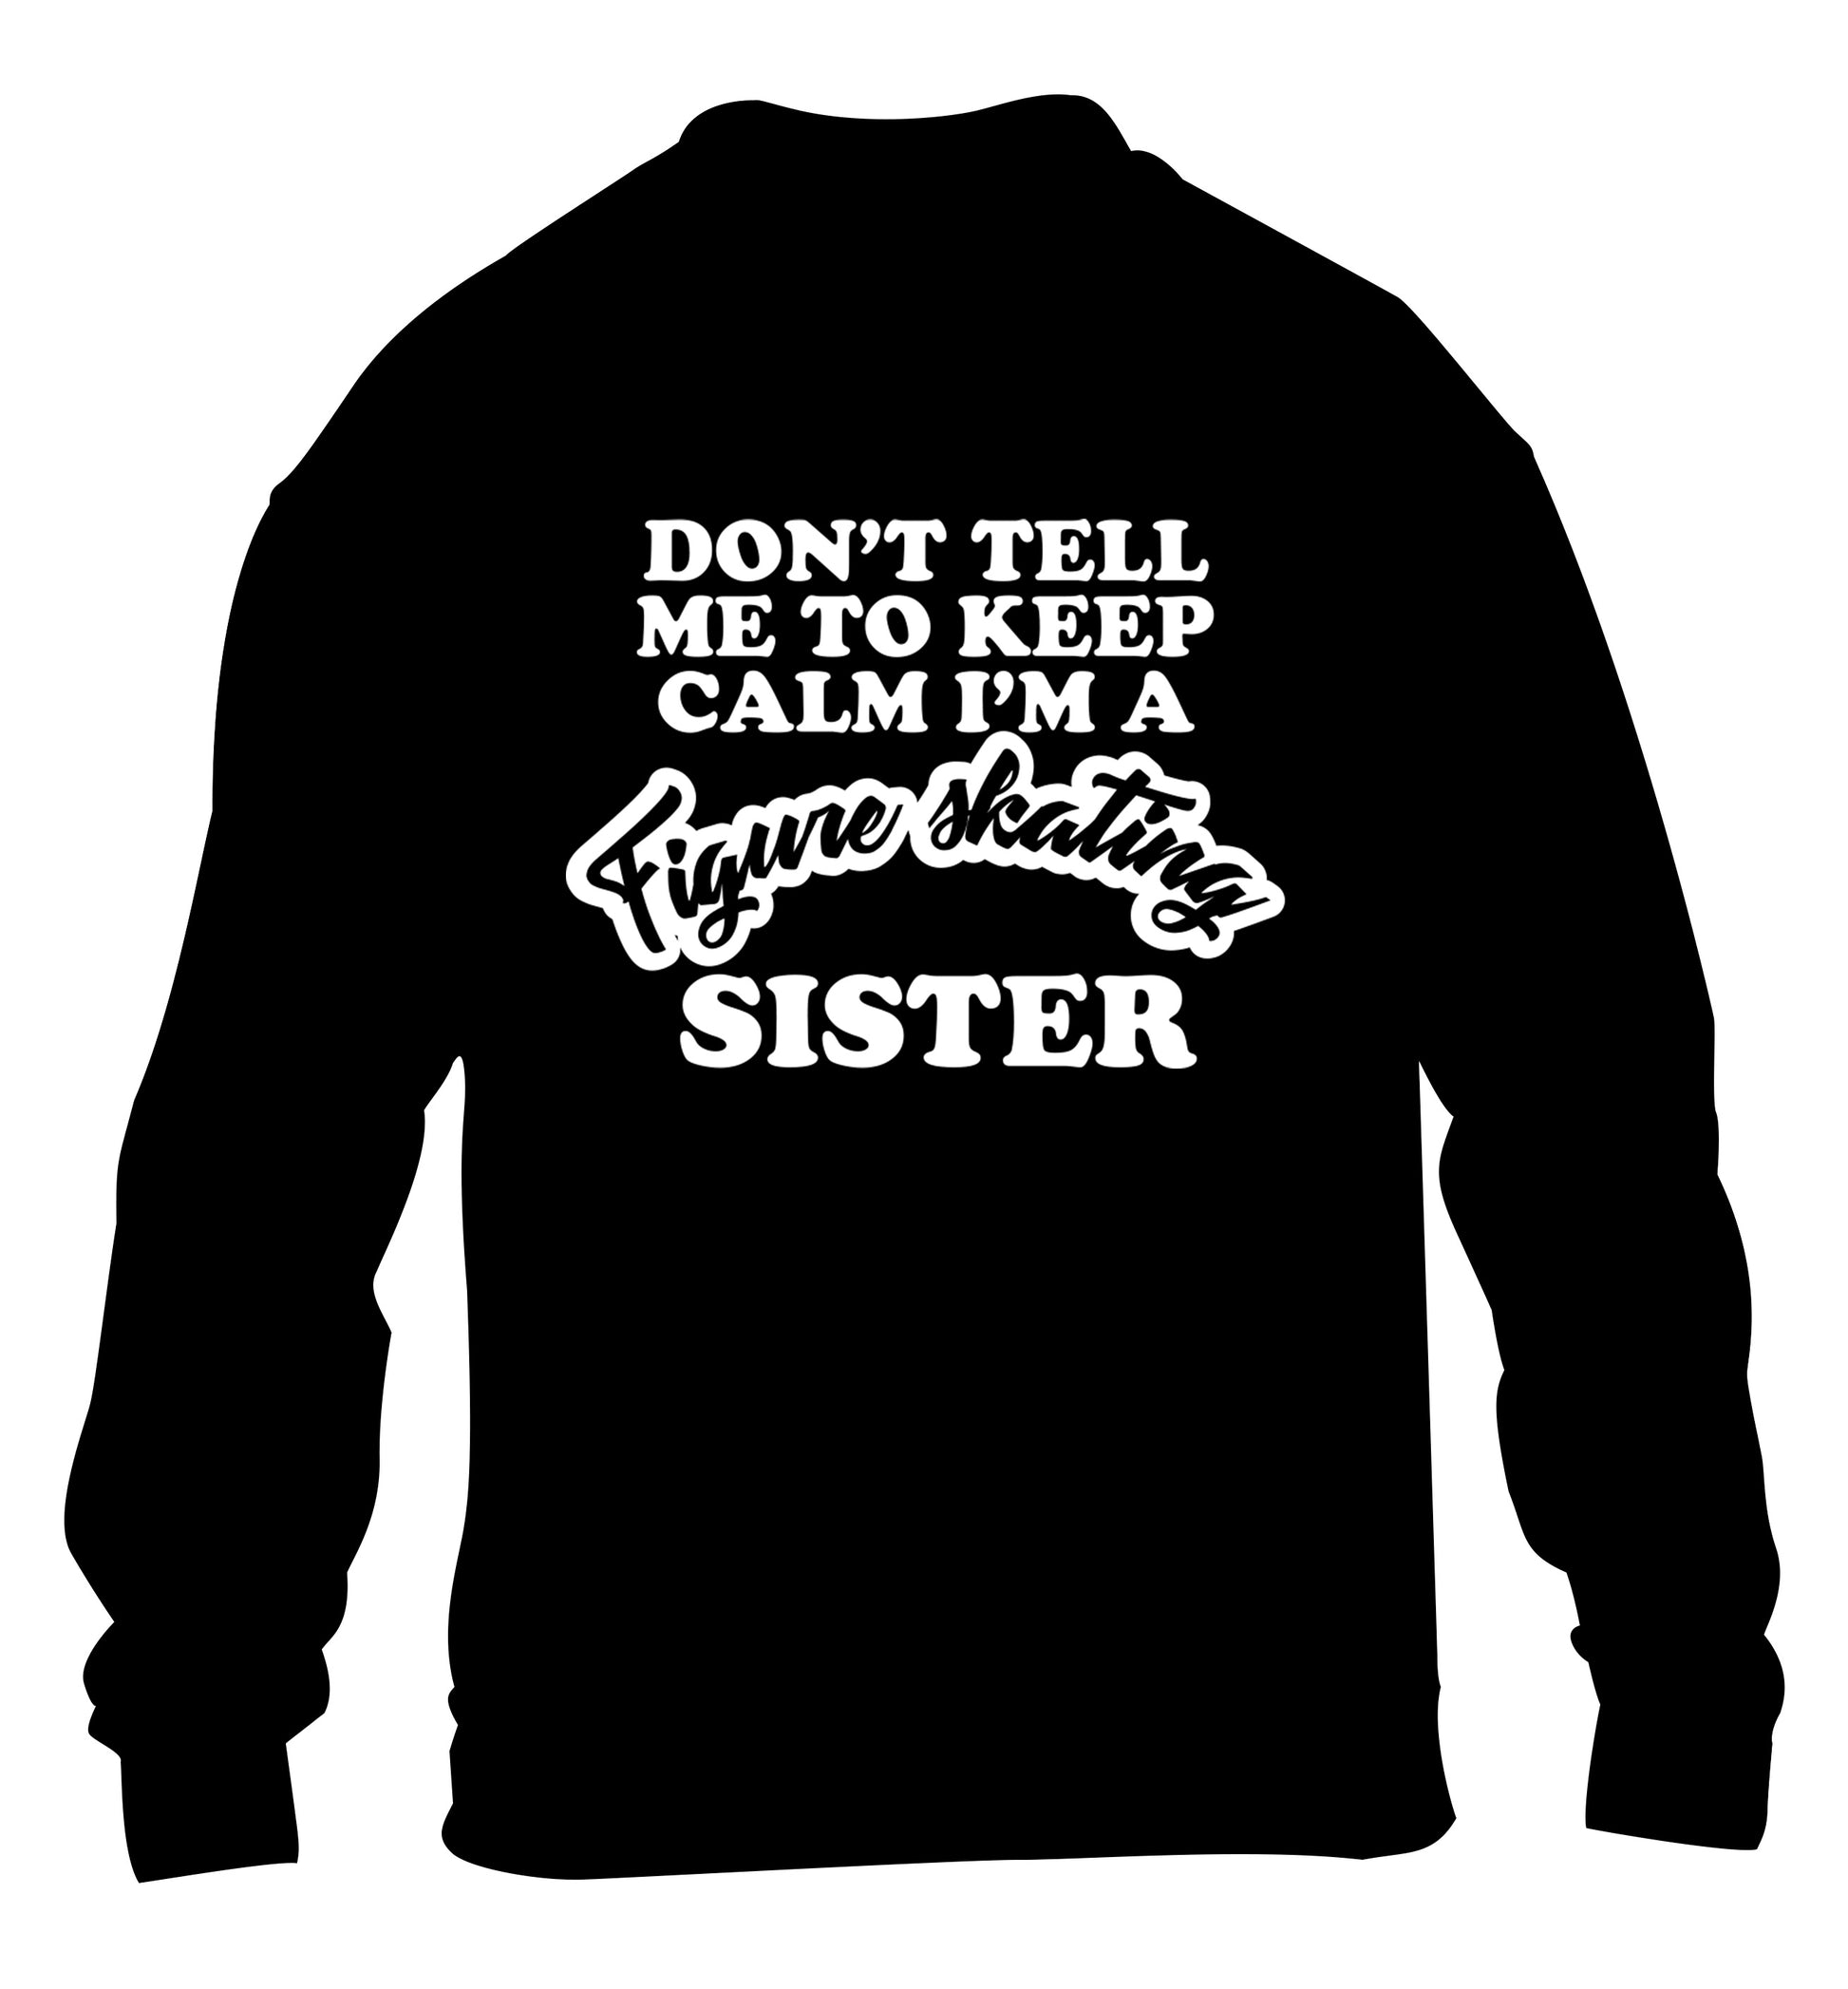 Don't tell me to keep calm I'm a figure skating sister children's black sweater 12-14 Years